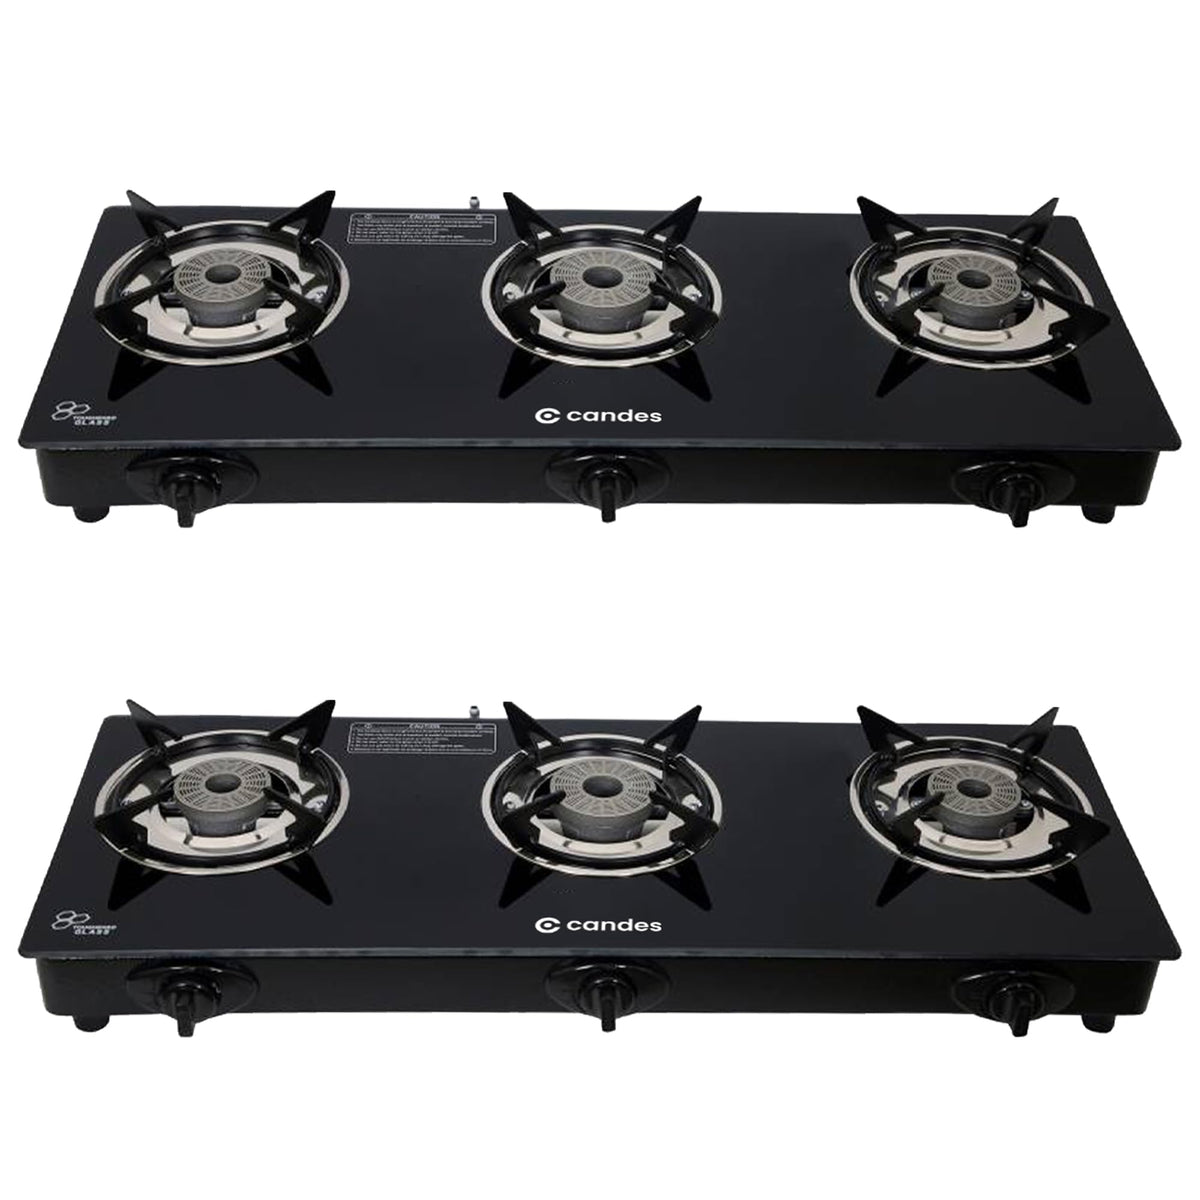 Candes Glass Automatic Gas Stove 3 Burners With Premium Die Cast Alloy | Pack Of 2 | Tornado Burner | 6 mm Toughened Glass Top | Nylon Knob | LPG Compatible | ISI Certified | 1 Yr Warranty | Black